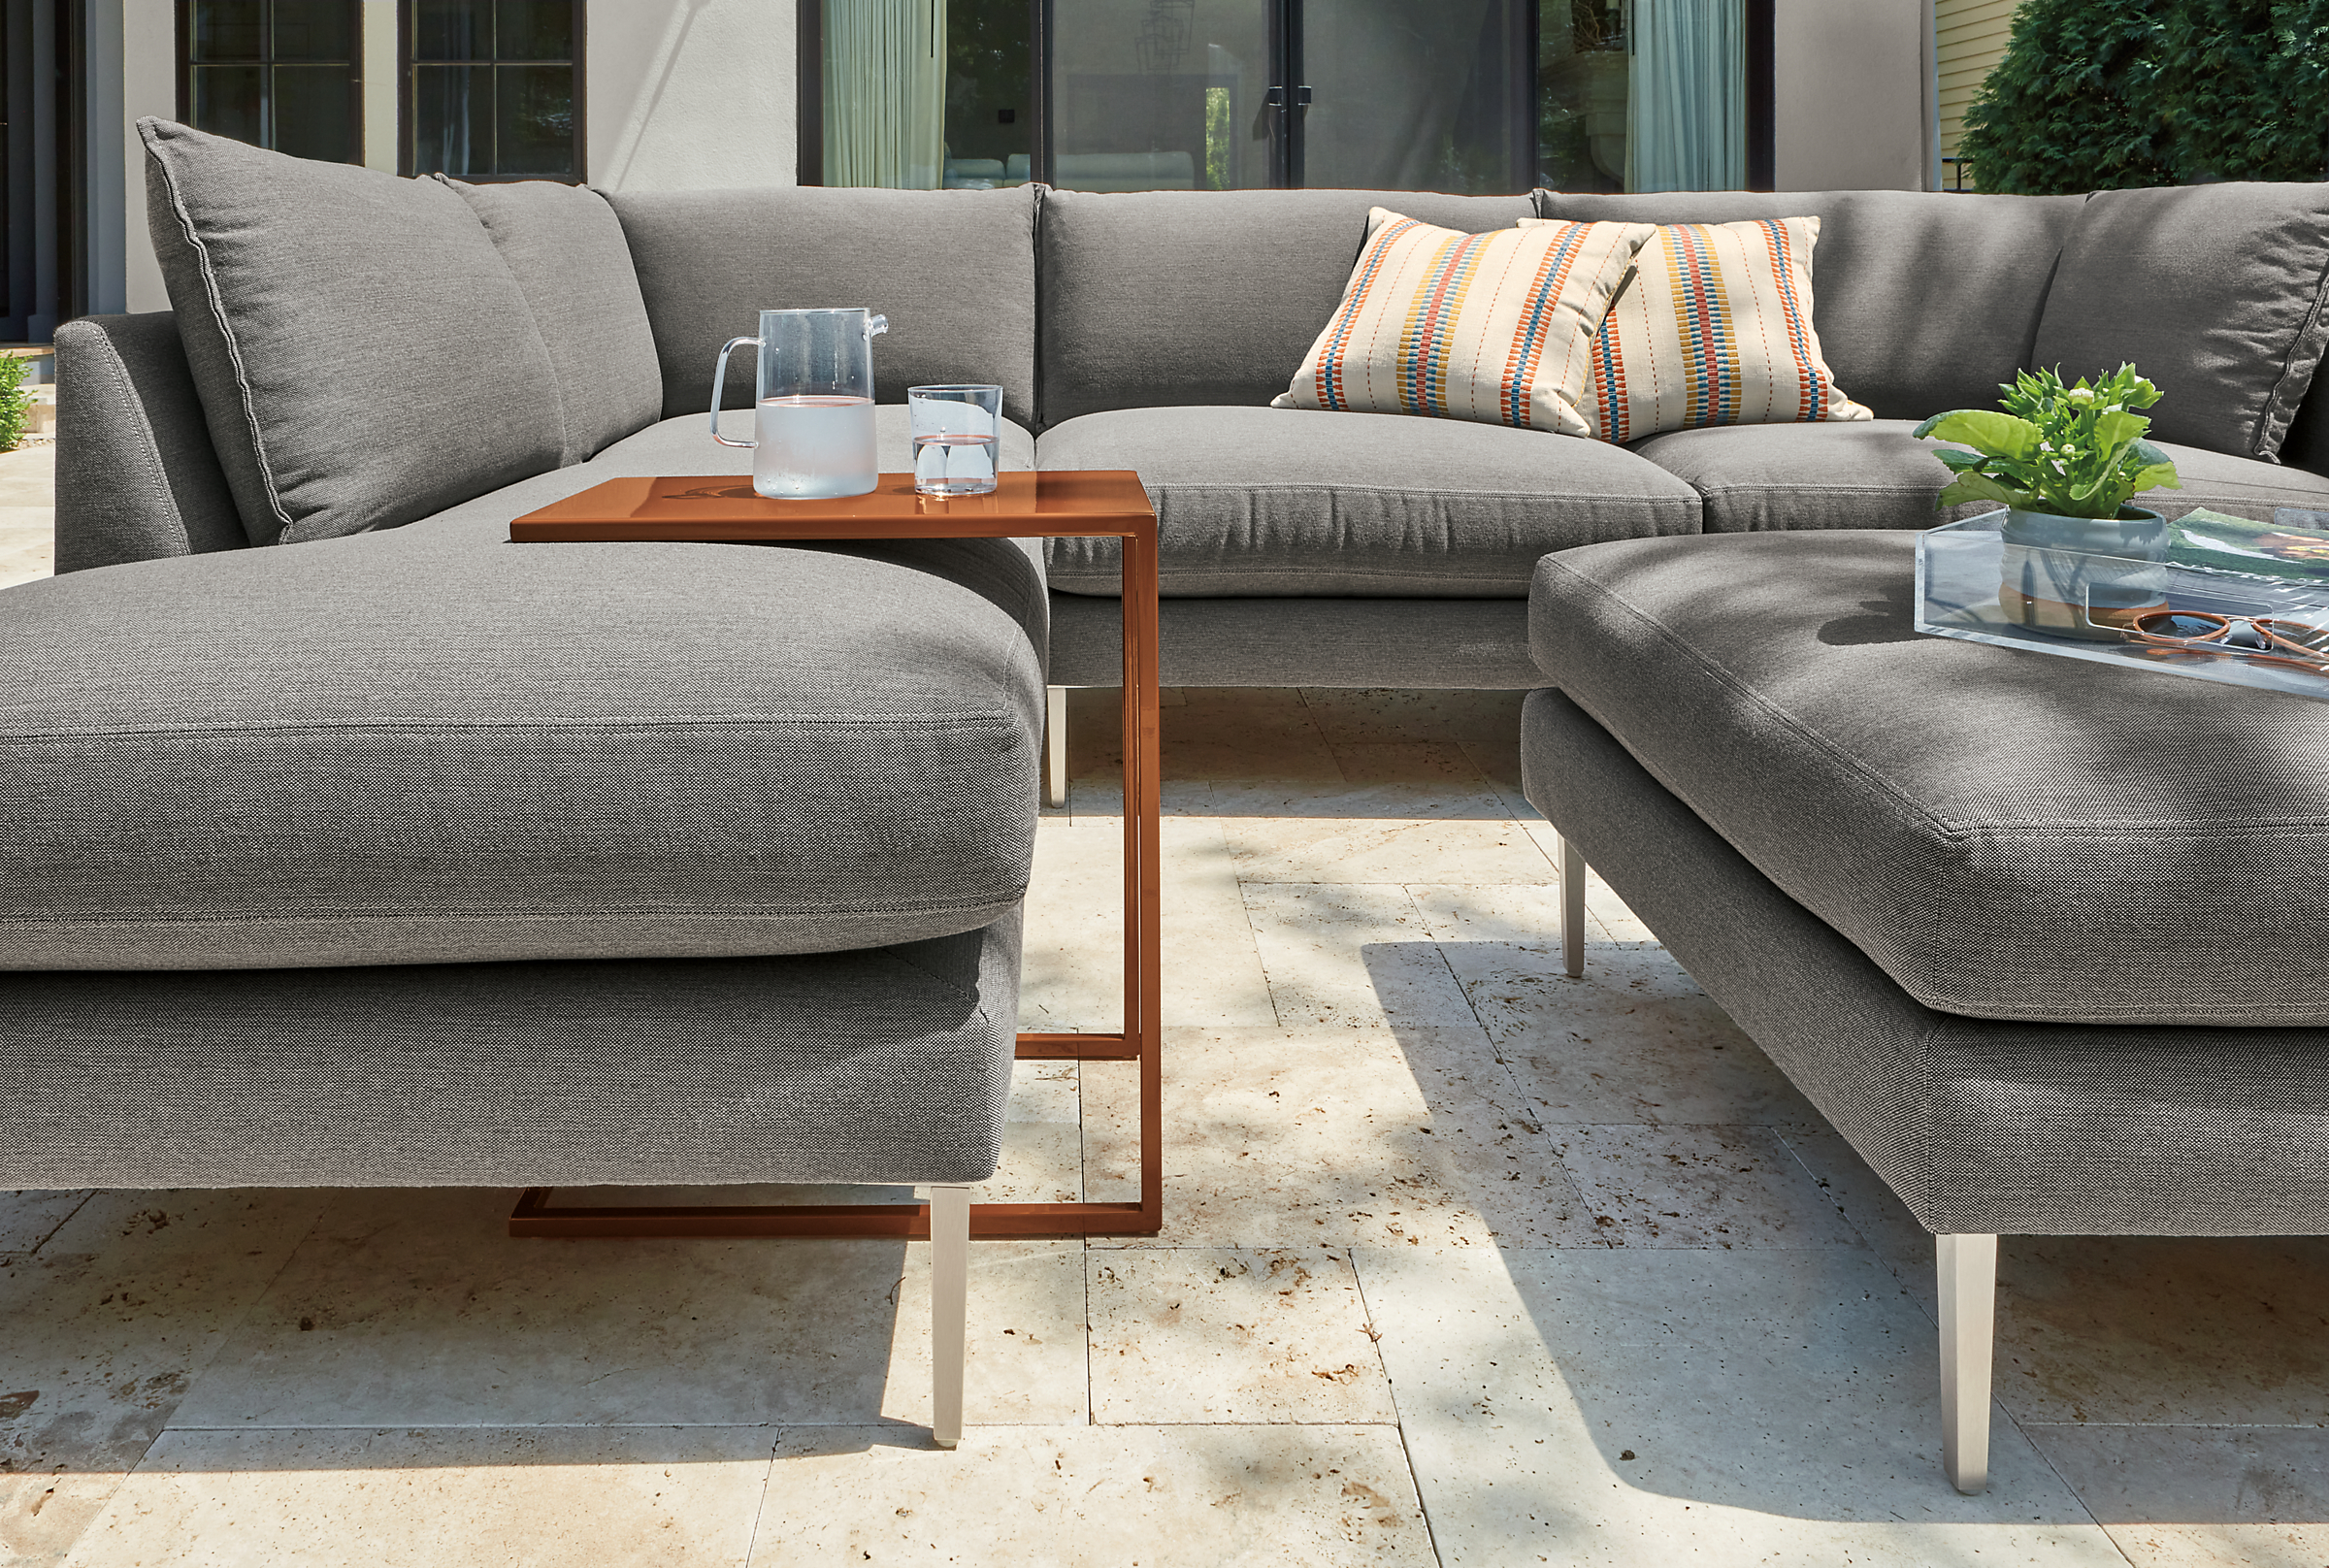 Slim outdoor c-table in cognac with Palm sectional and ottoman in Pelham grey fabric.